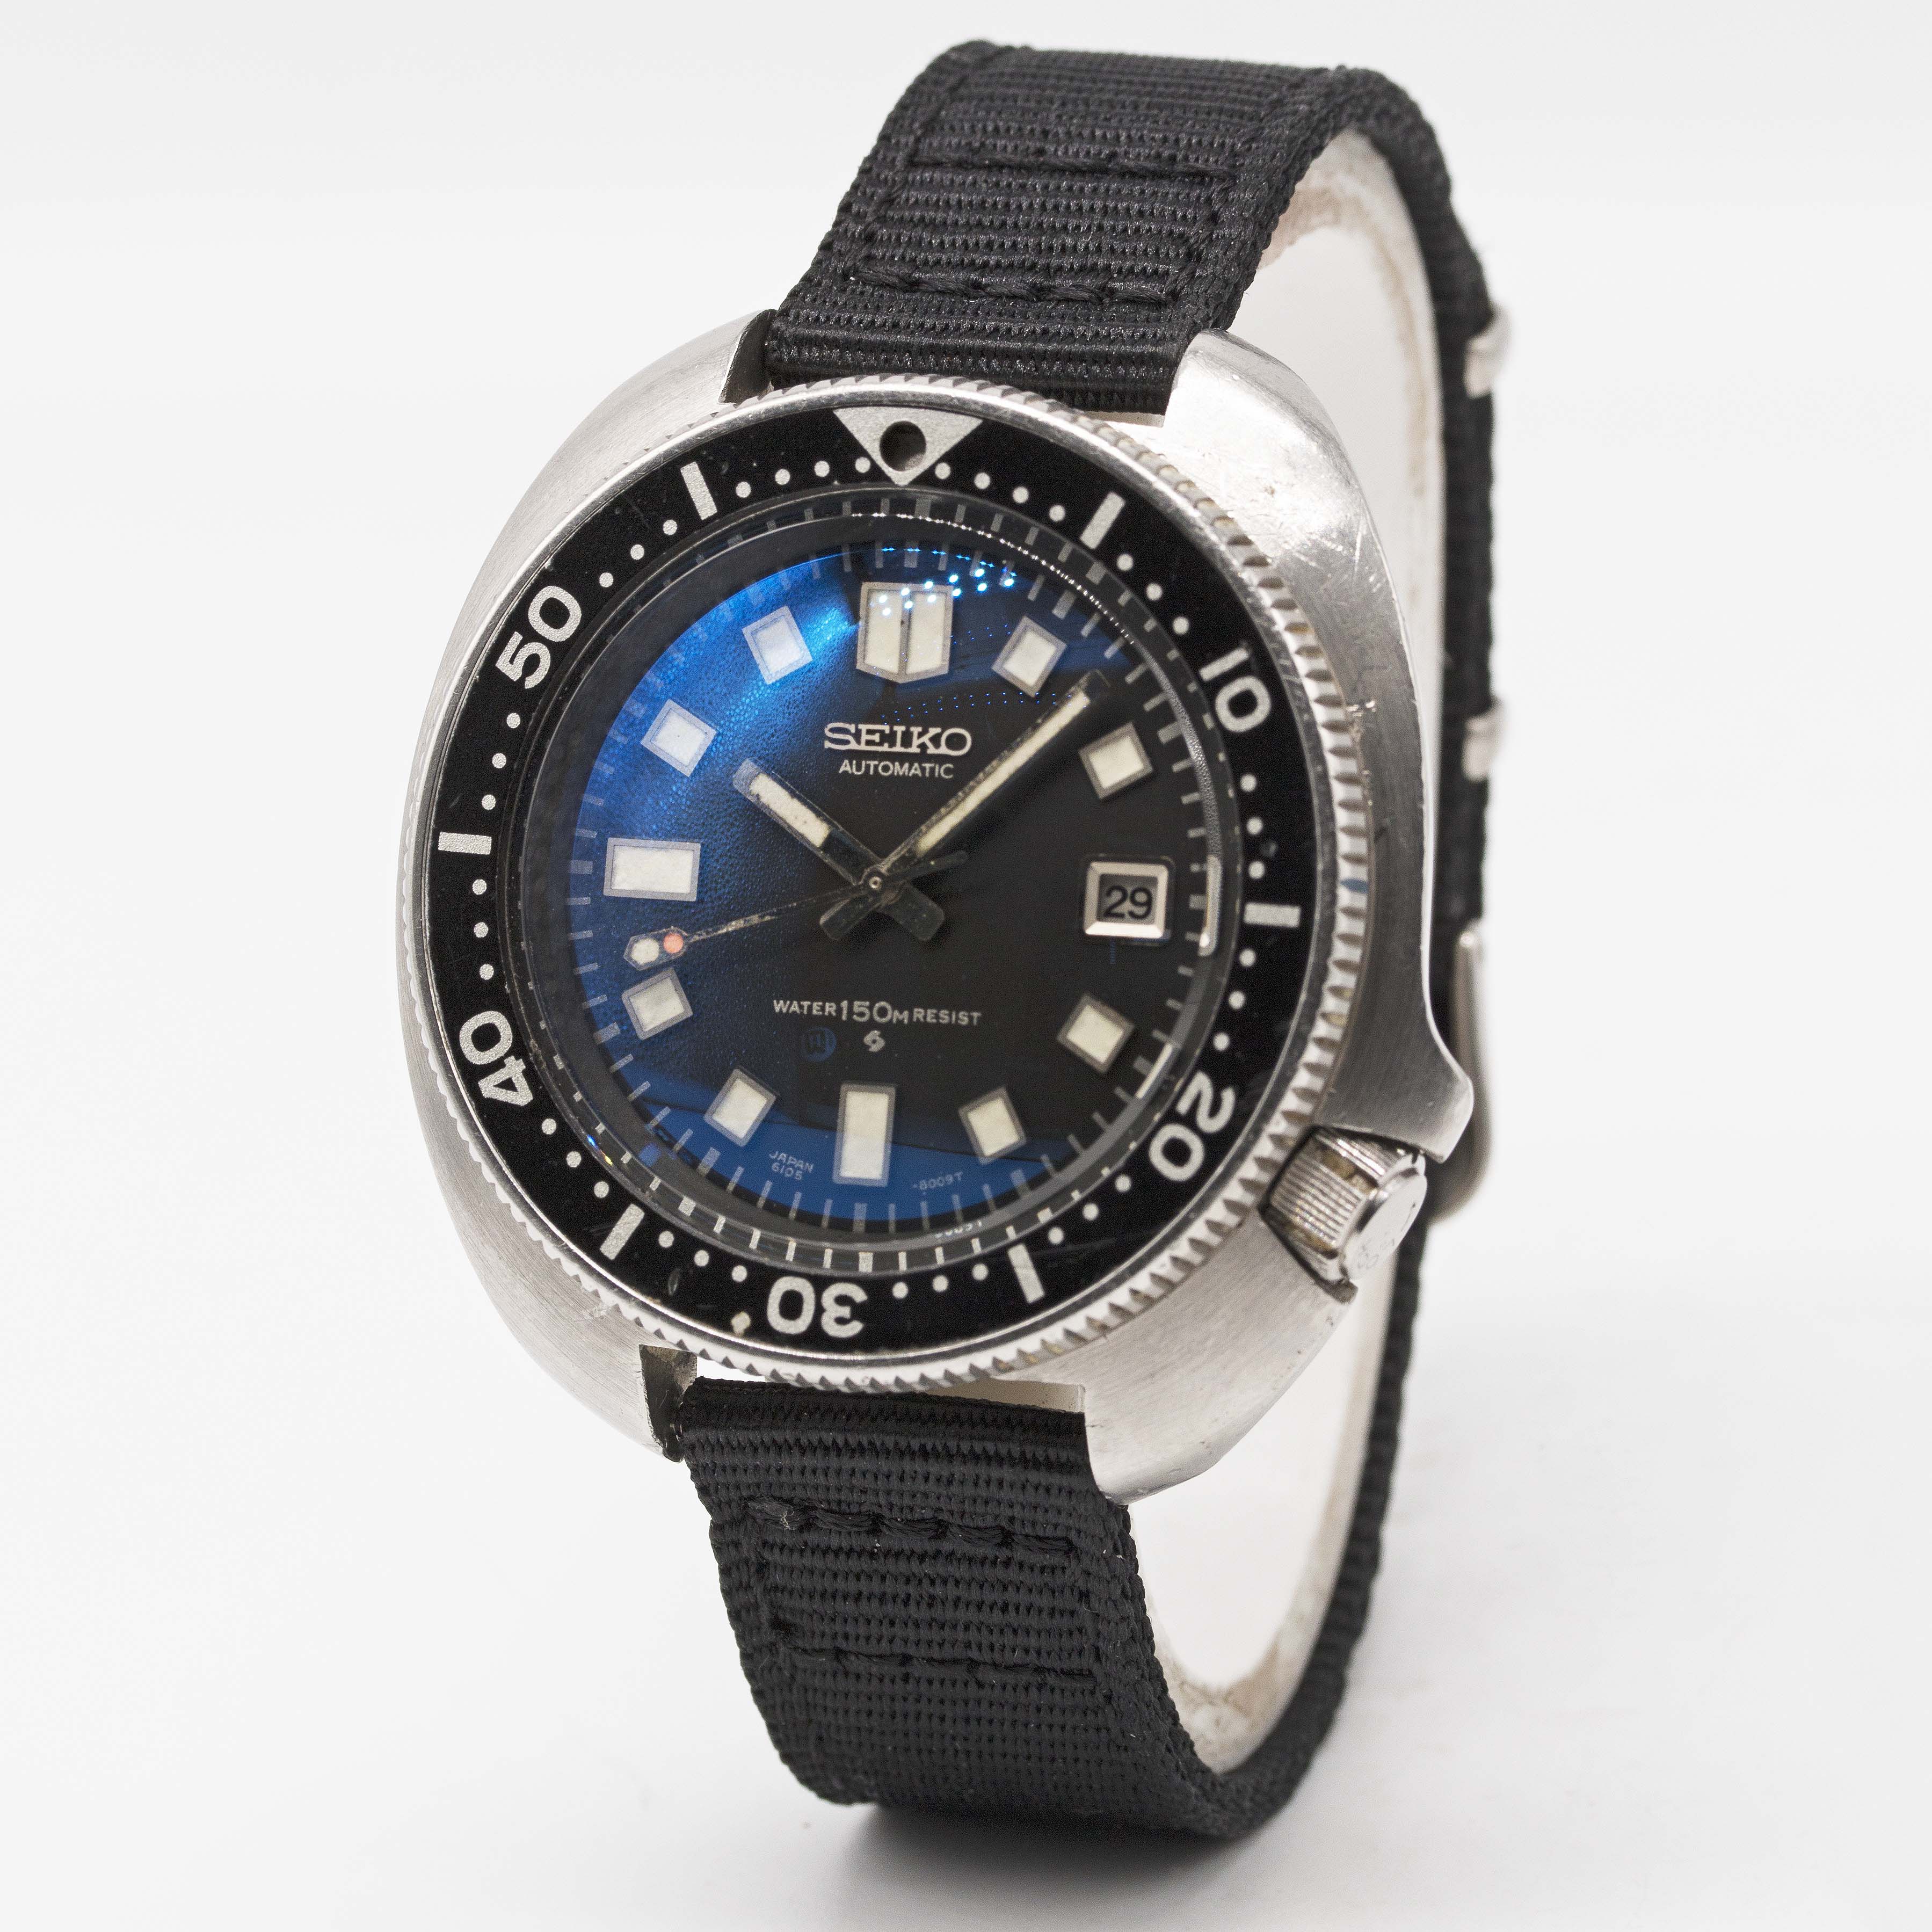 A GENTLEMAN'S STAINLESS STEEL SEIKO "TURTLE" 150M AUTOMATIC DIVERS WRIST WATCH CIRCA 1975, REF. - Image 2 of 4